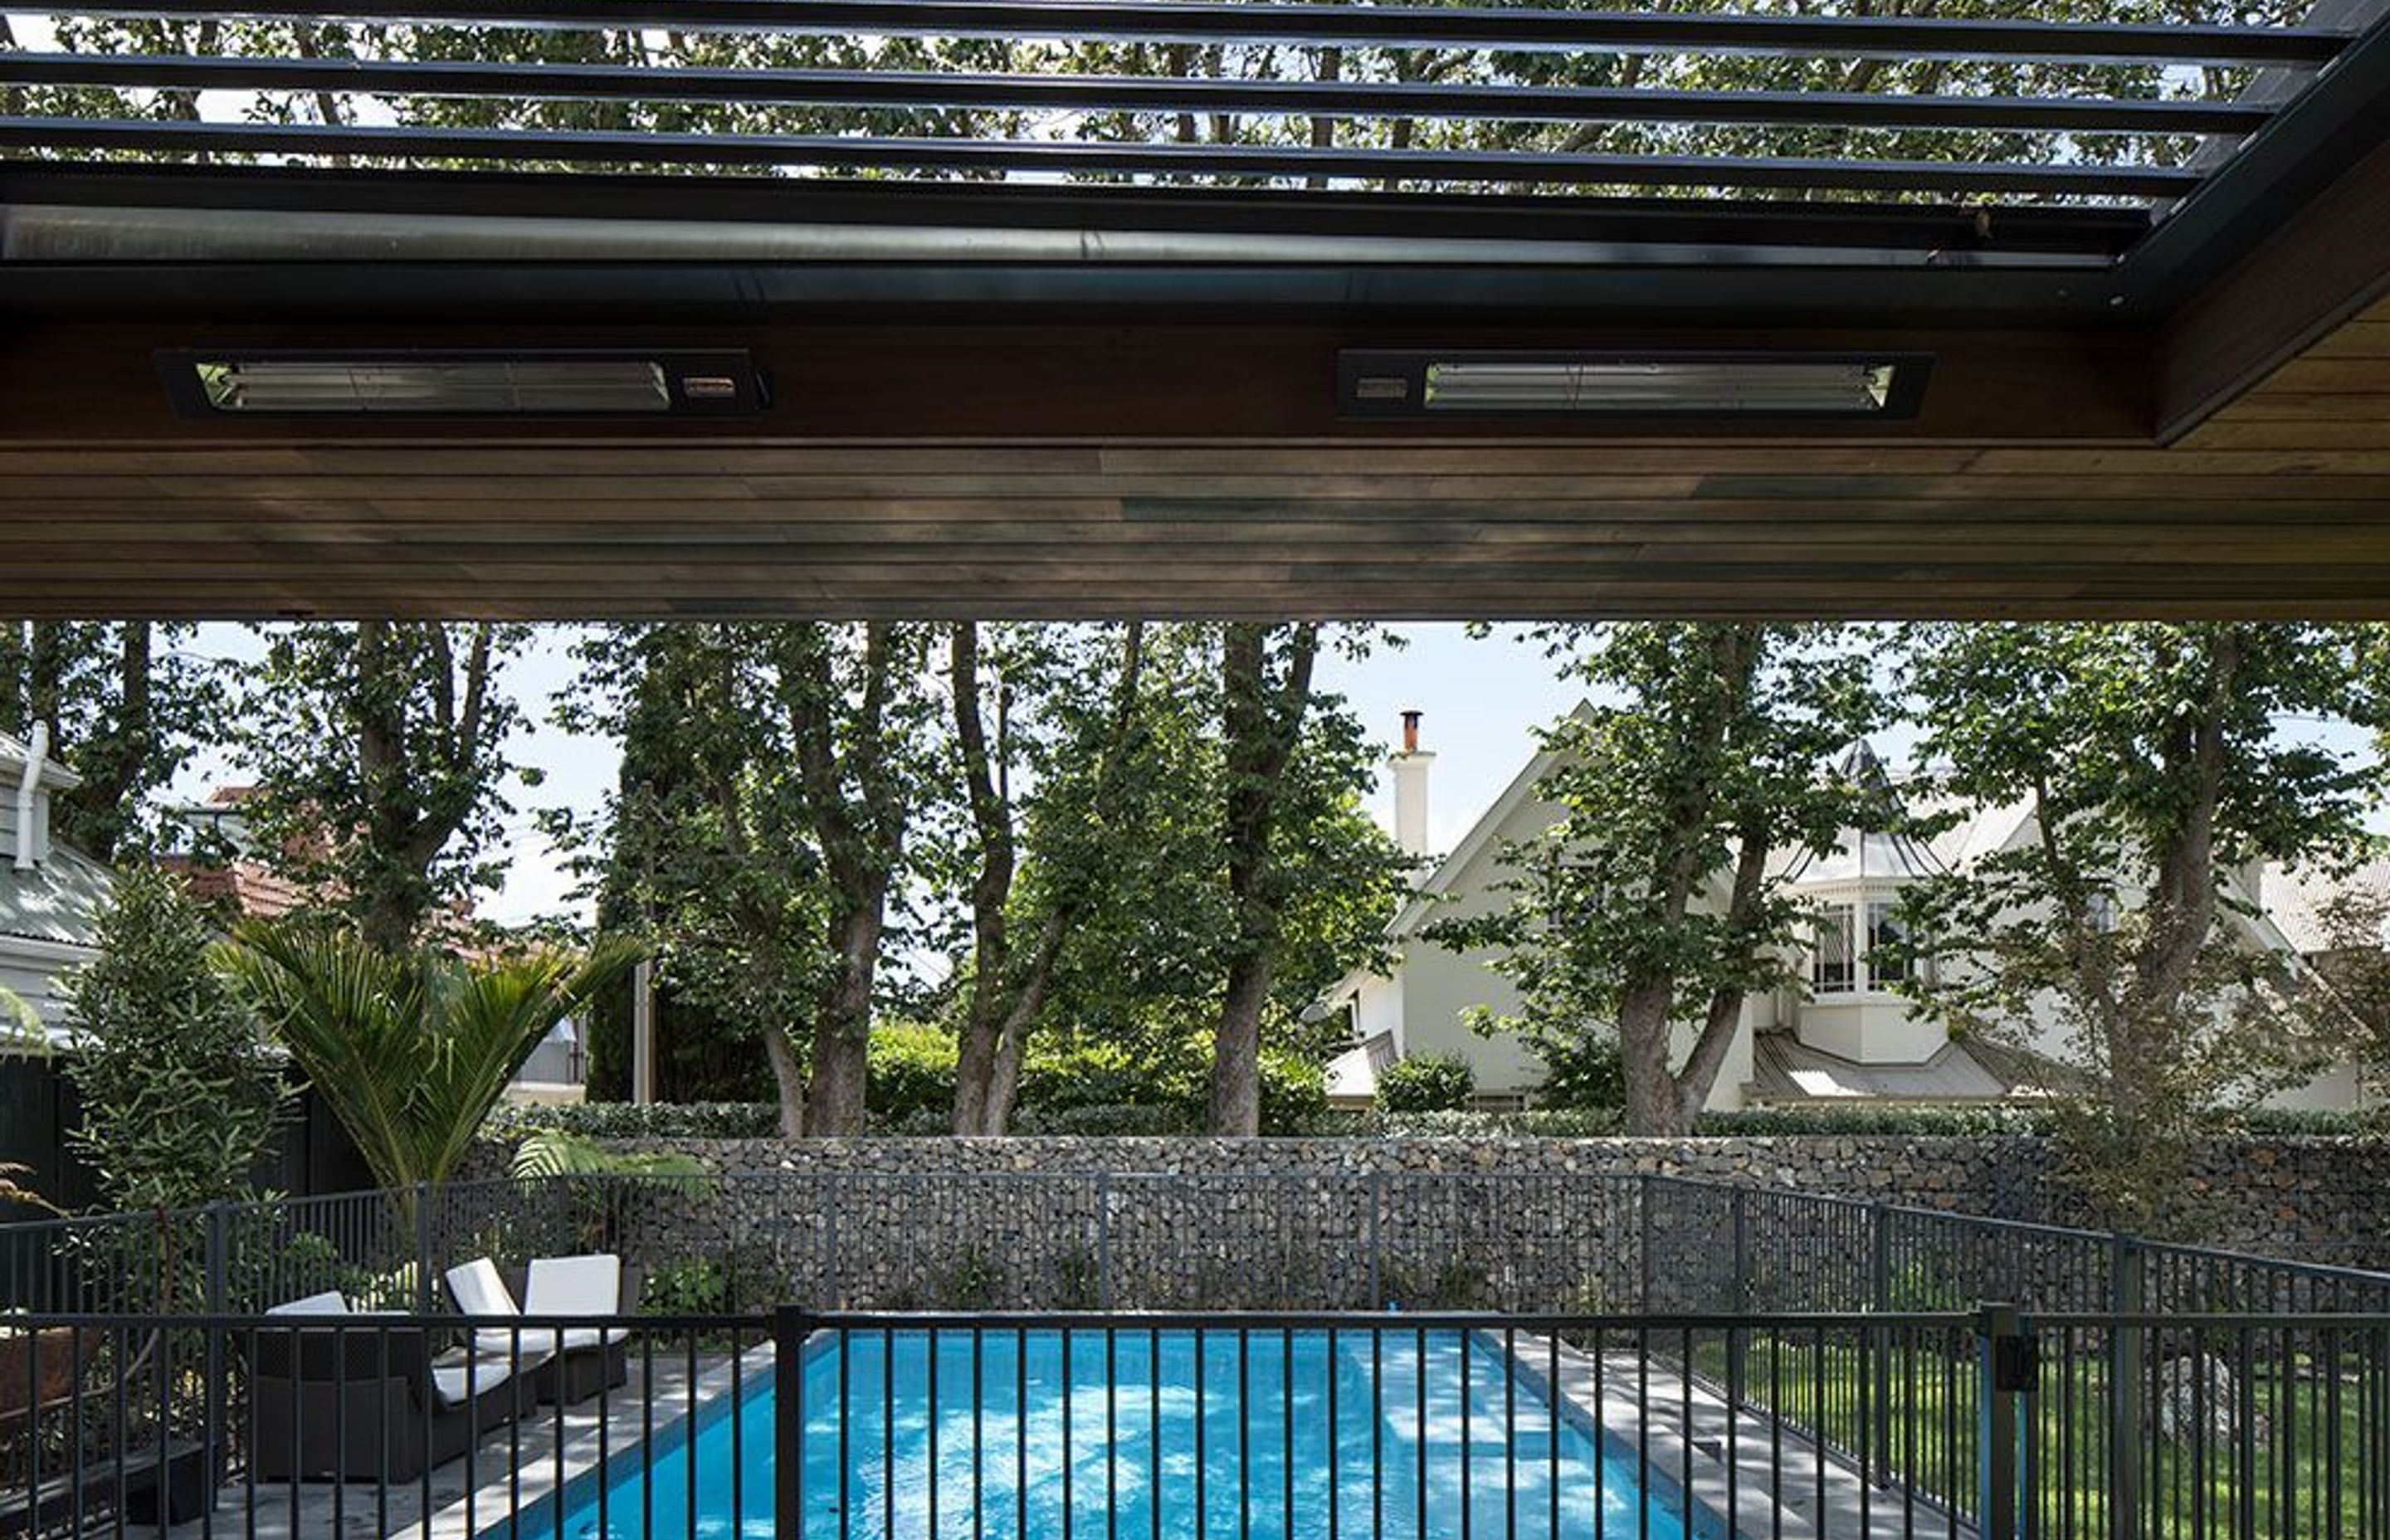 An outdoor room overlooks the swimming pool, mature trees and a gubeon wall filled with volcanic rock excavated from the site prior to the build.